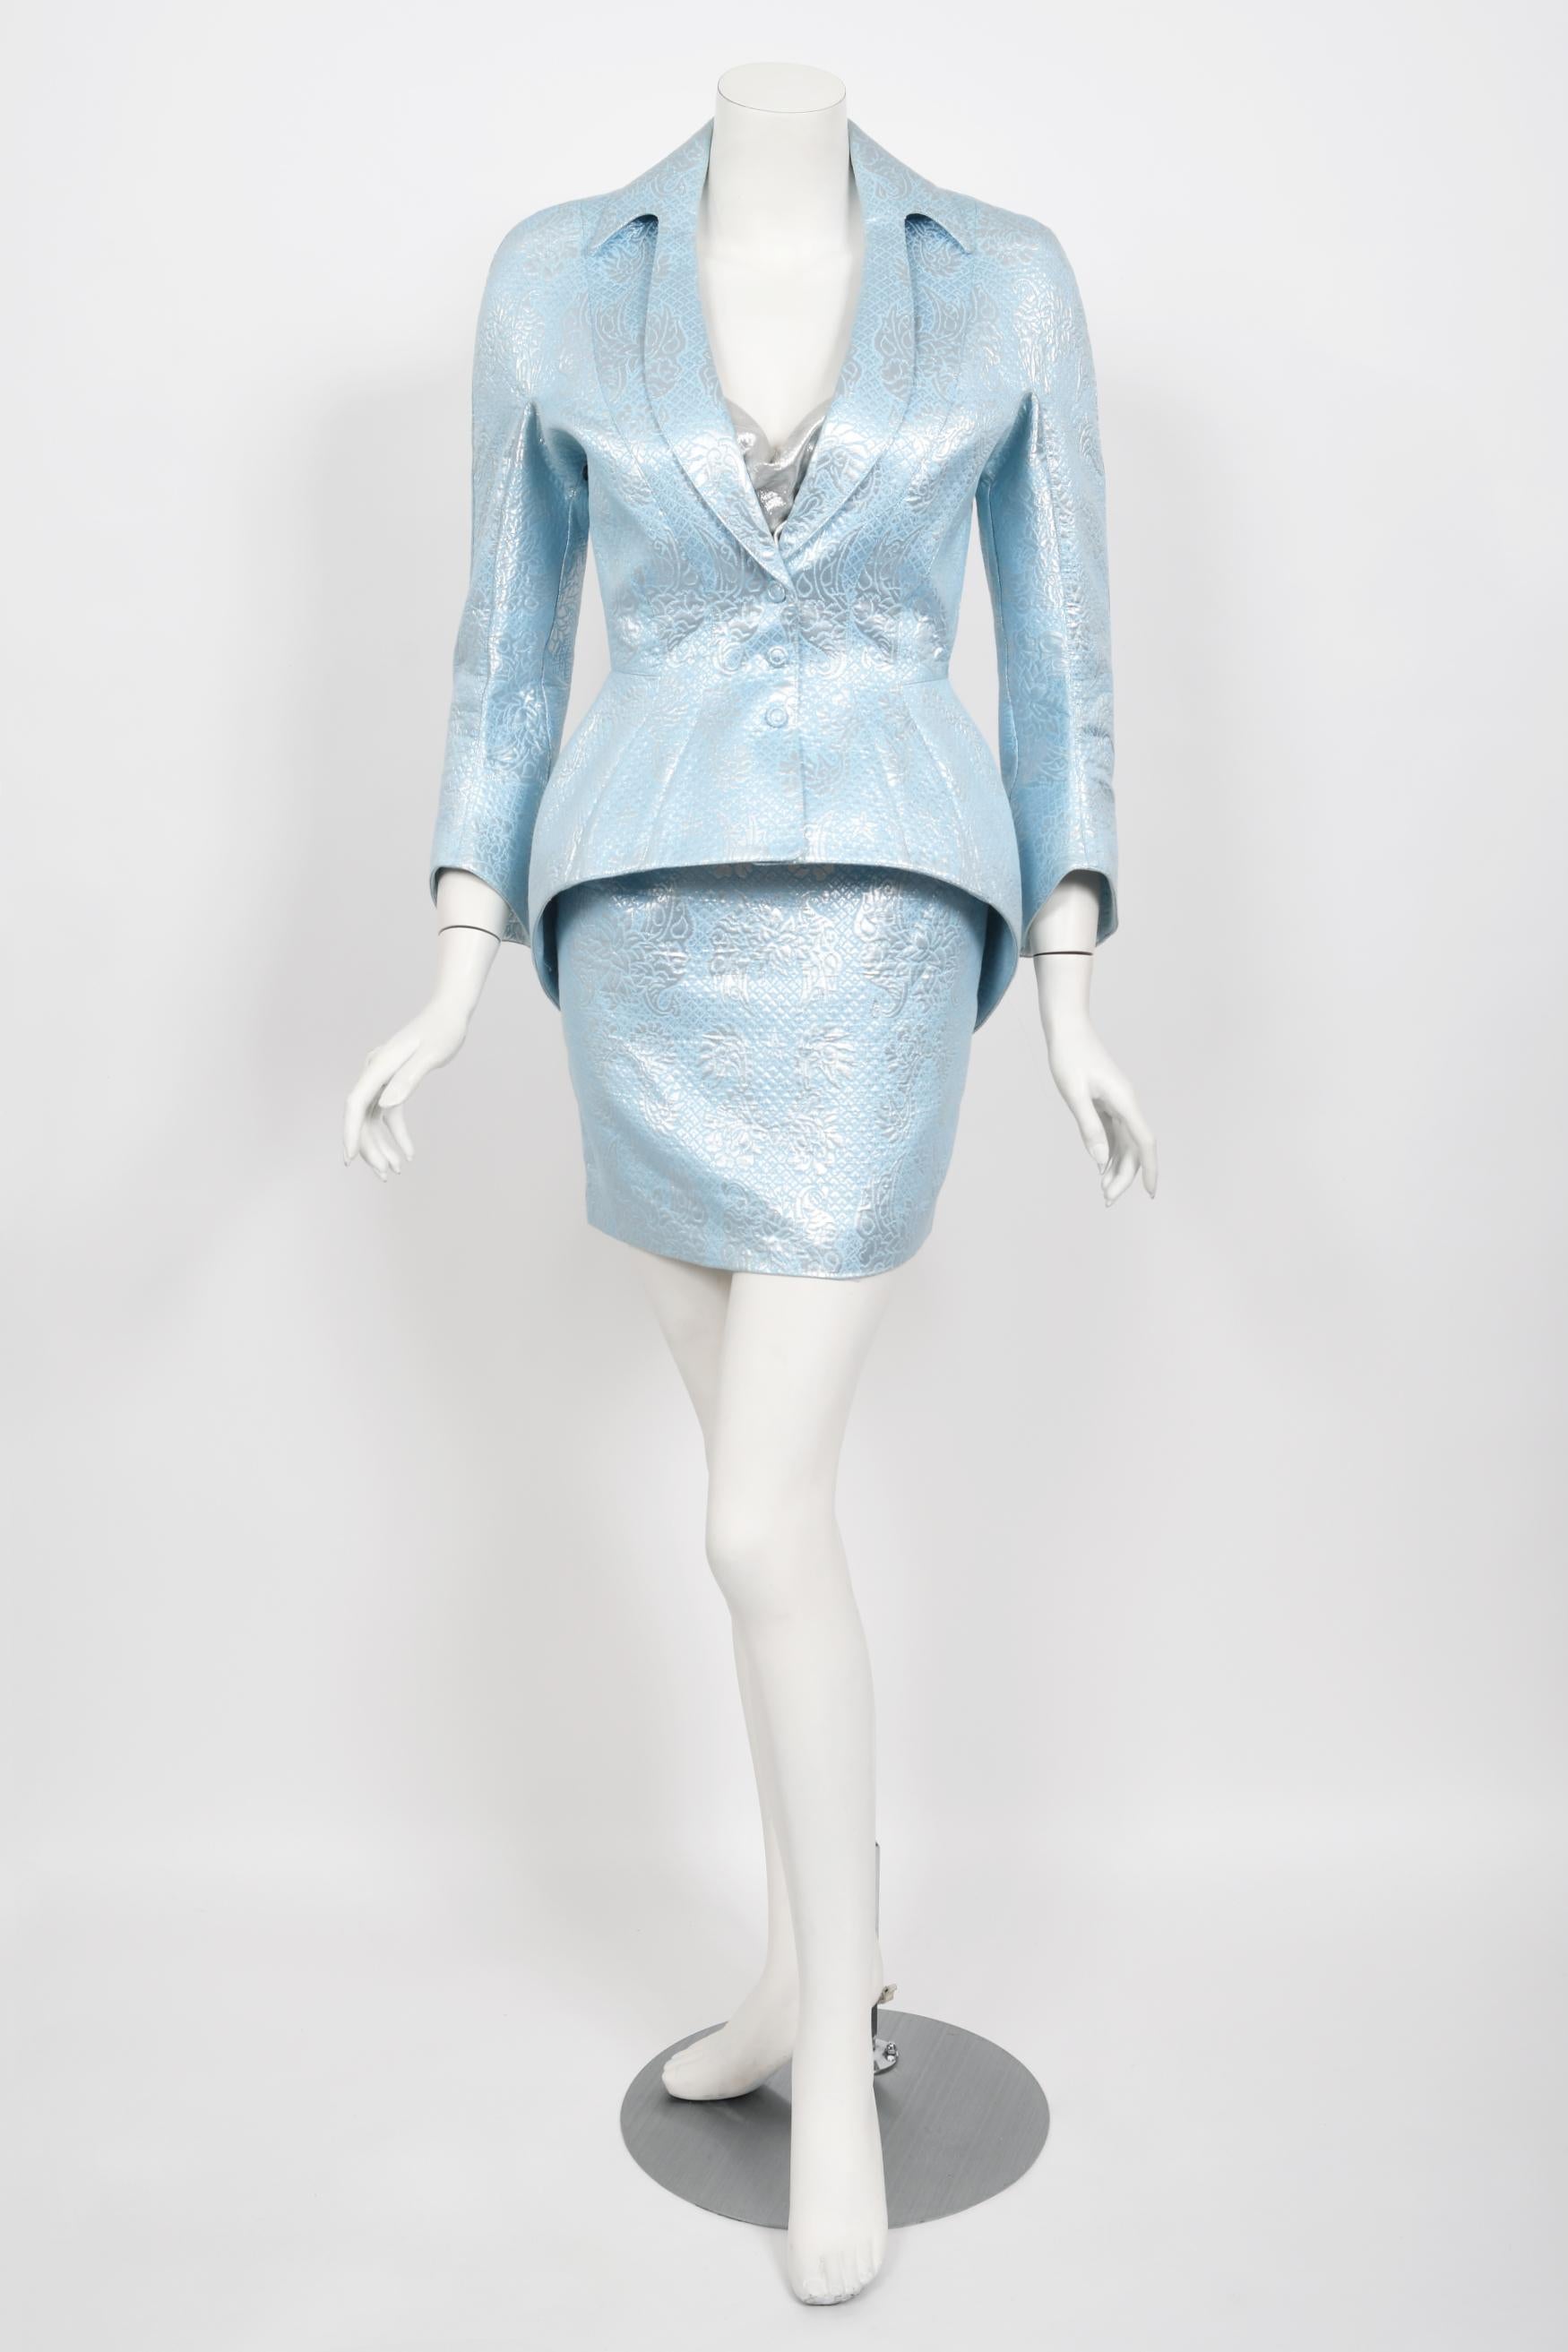 Iconic 1992 Thierry Mugler Couture Metallic Silver Blue Bustier Mini Skirt Suit For Sale 1